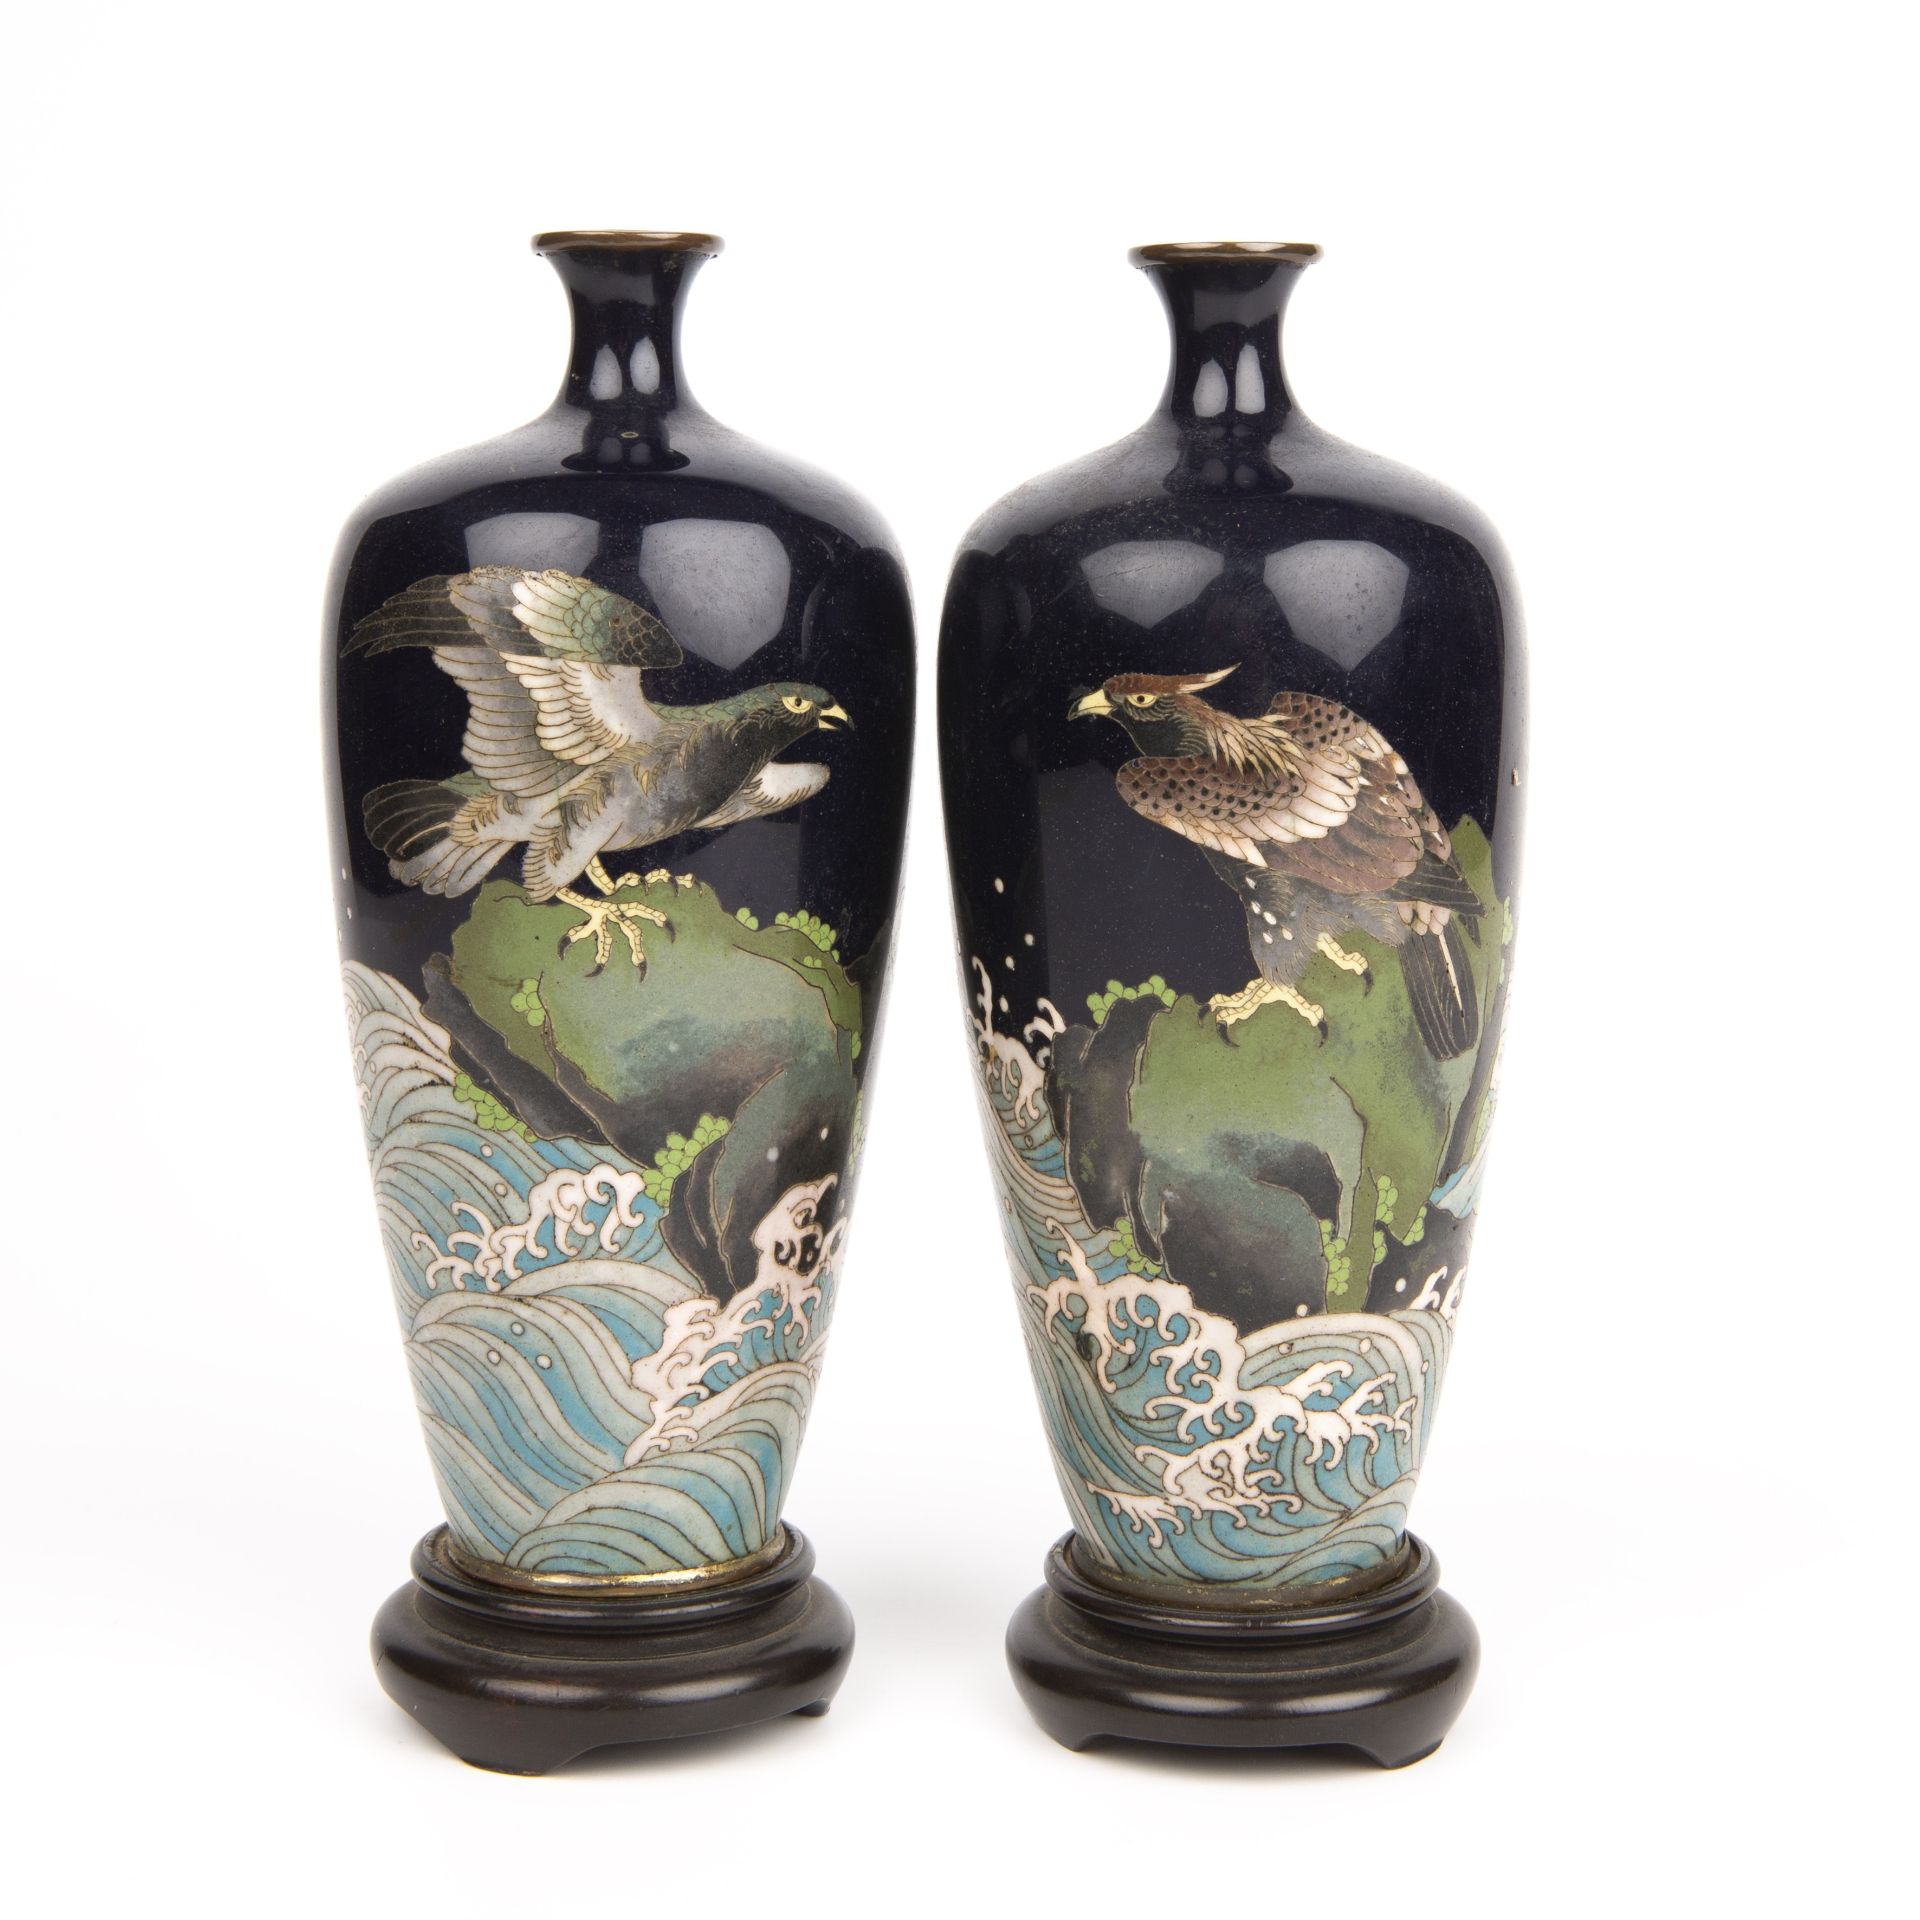 A small pair of early 20th century Japanese cloisonne vases decorated with eagles each 15cm high.